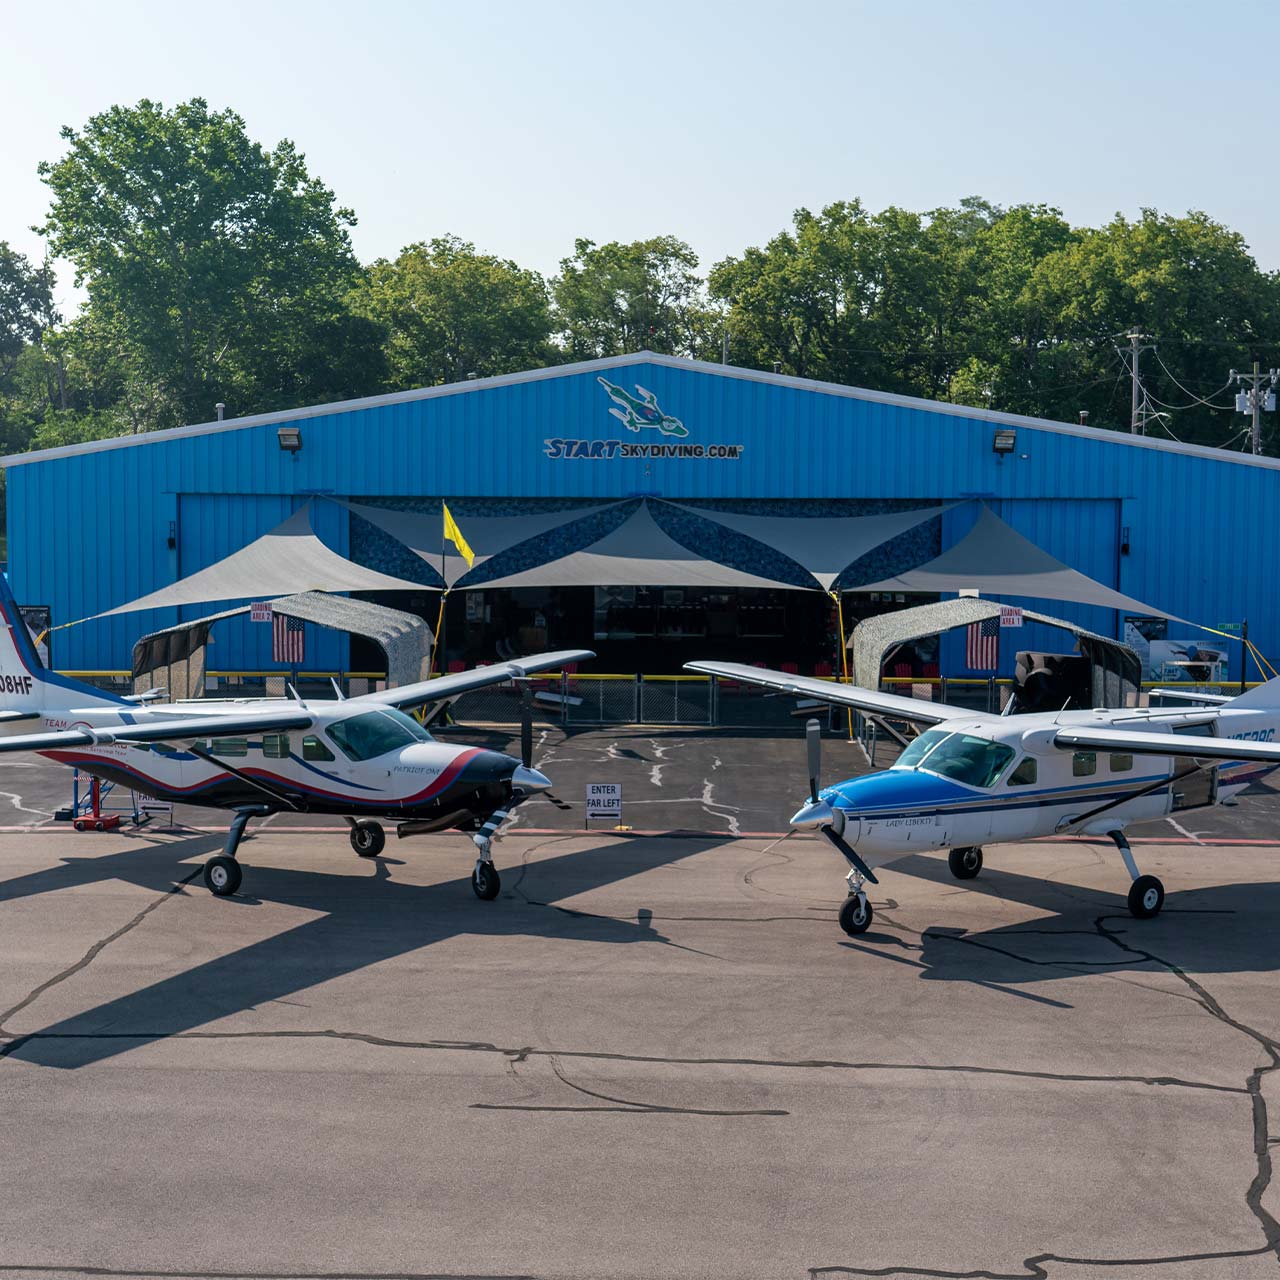 Start Skydiving's Cessna 208 Grand Caravan and Cessna 208B parked in front of a large, spacious blue airplane hangar